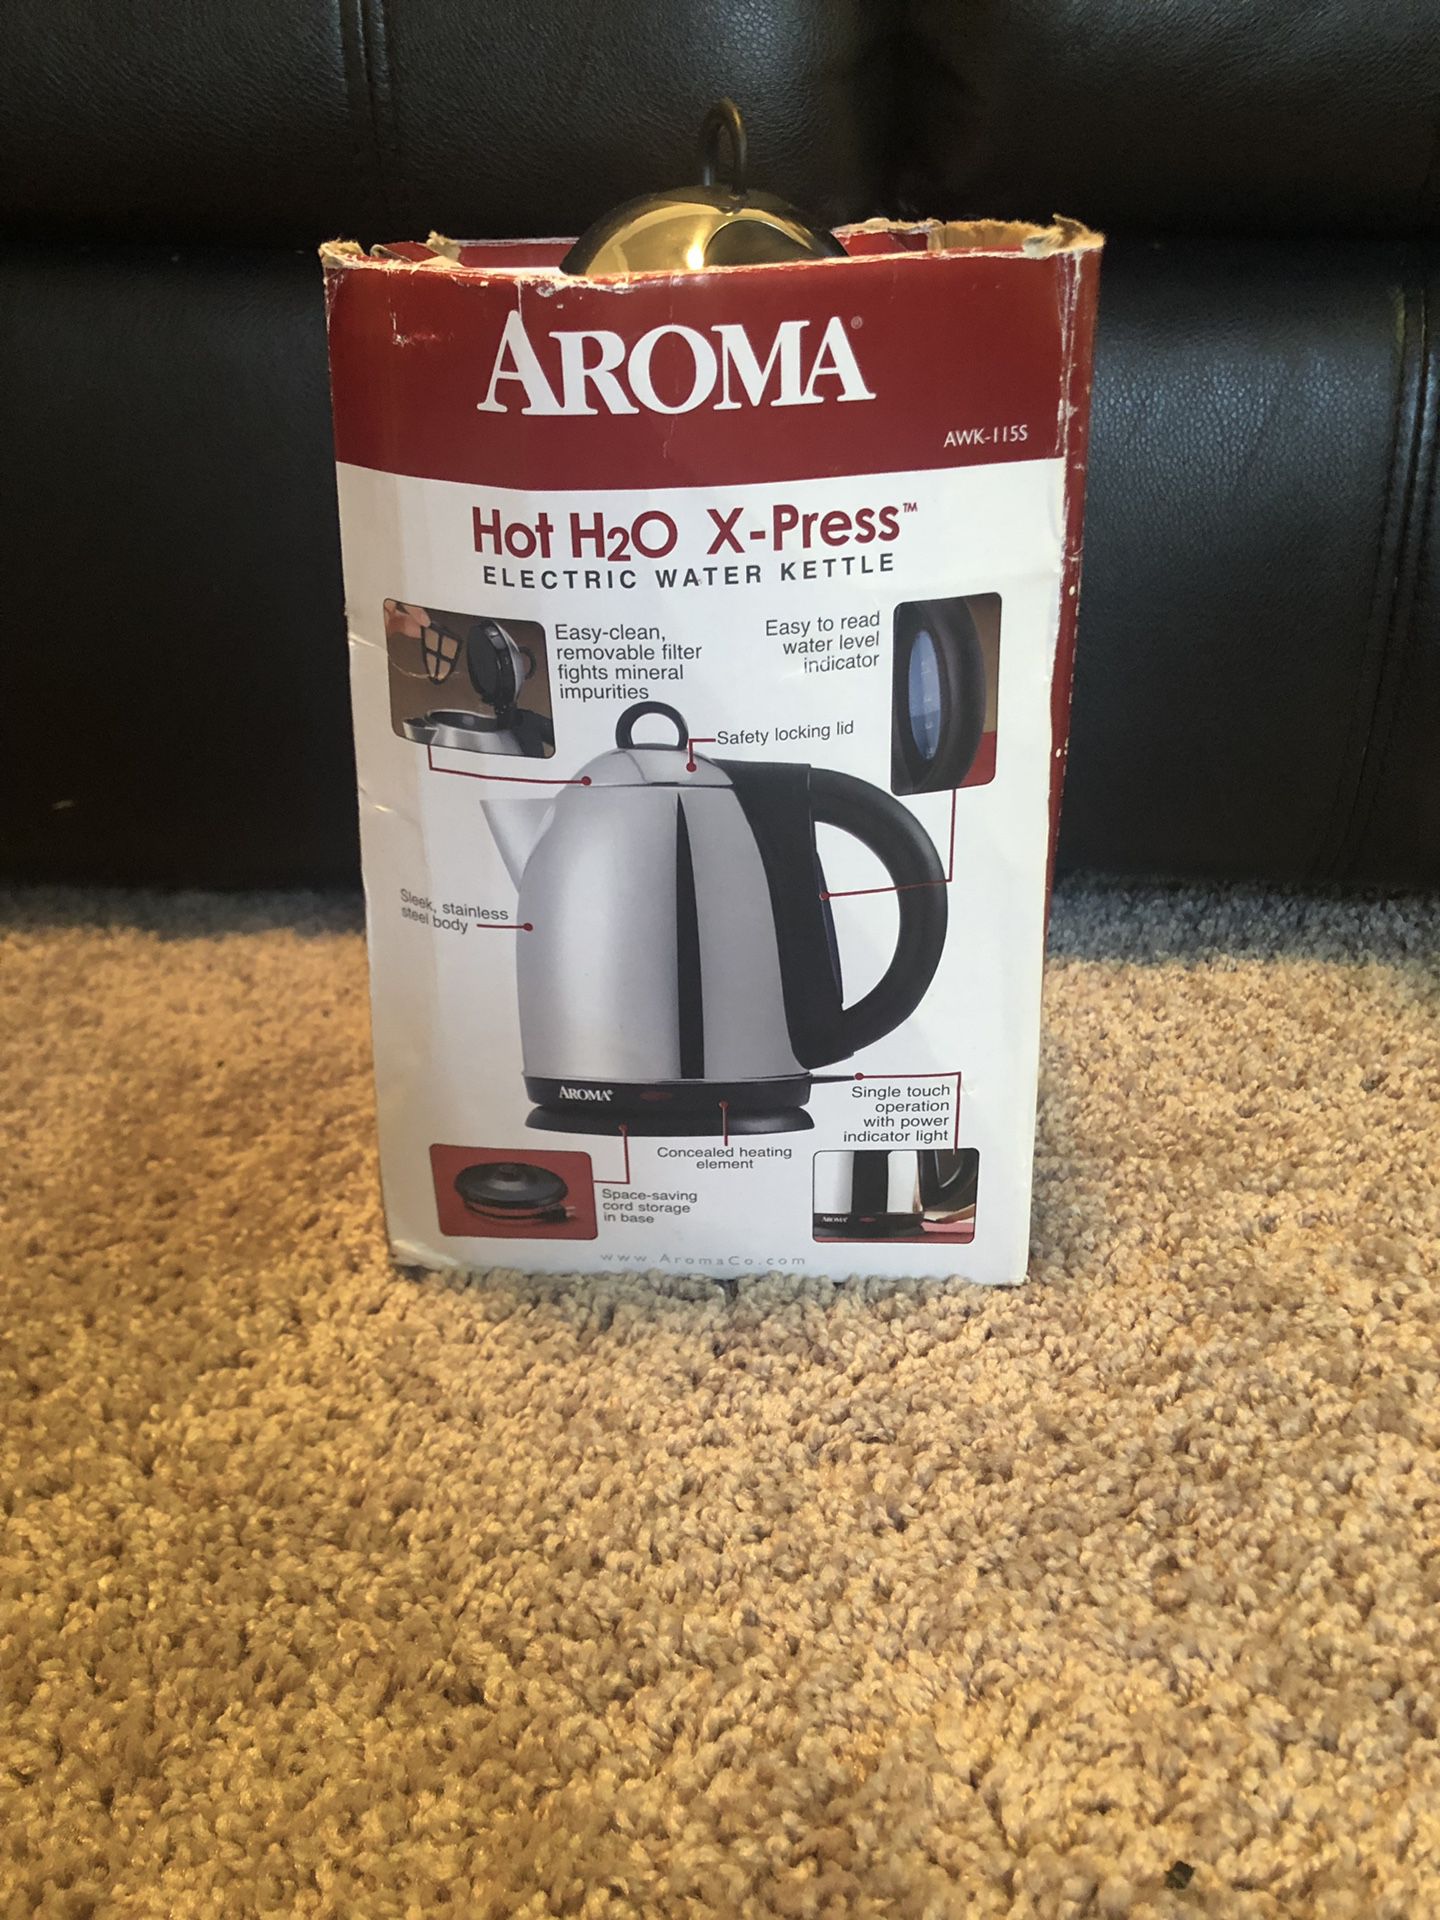 AROMA hot h20 X- press electric water kettle 1.5L color silver if you go buy in store you would find it for 40 dollars